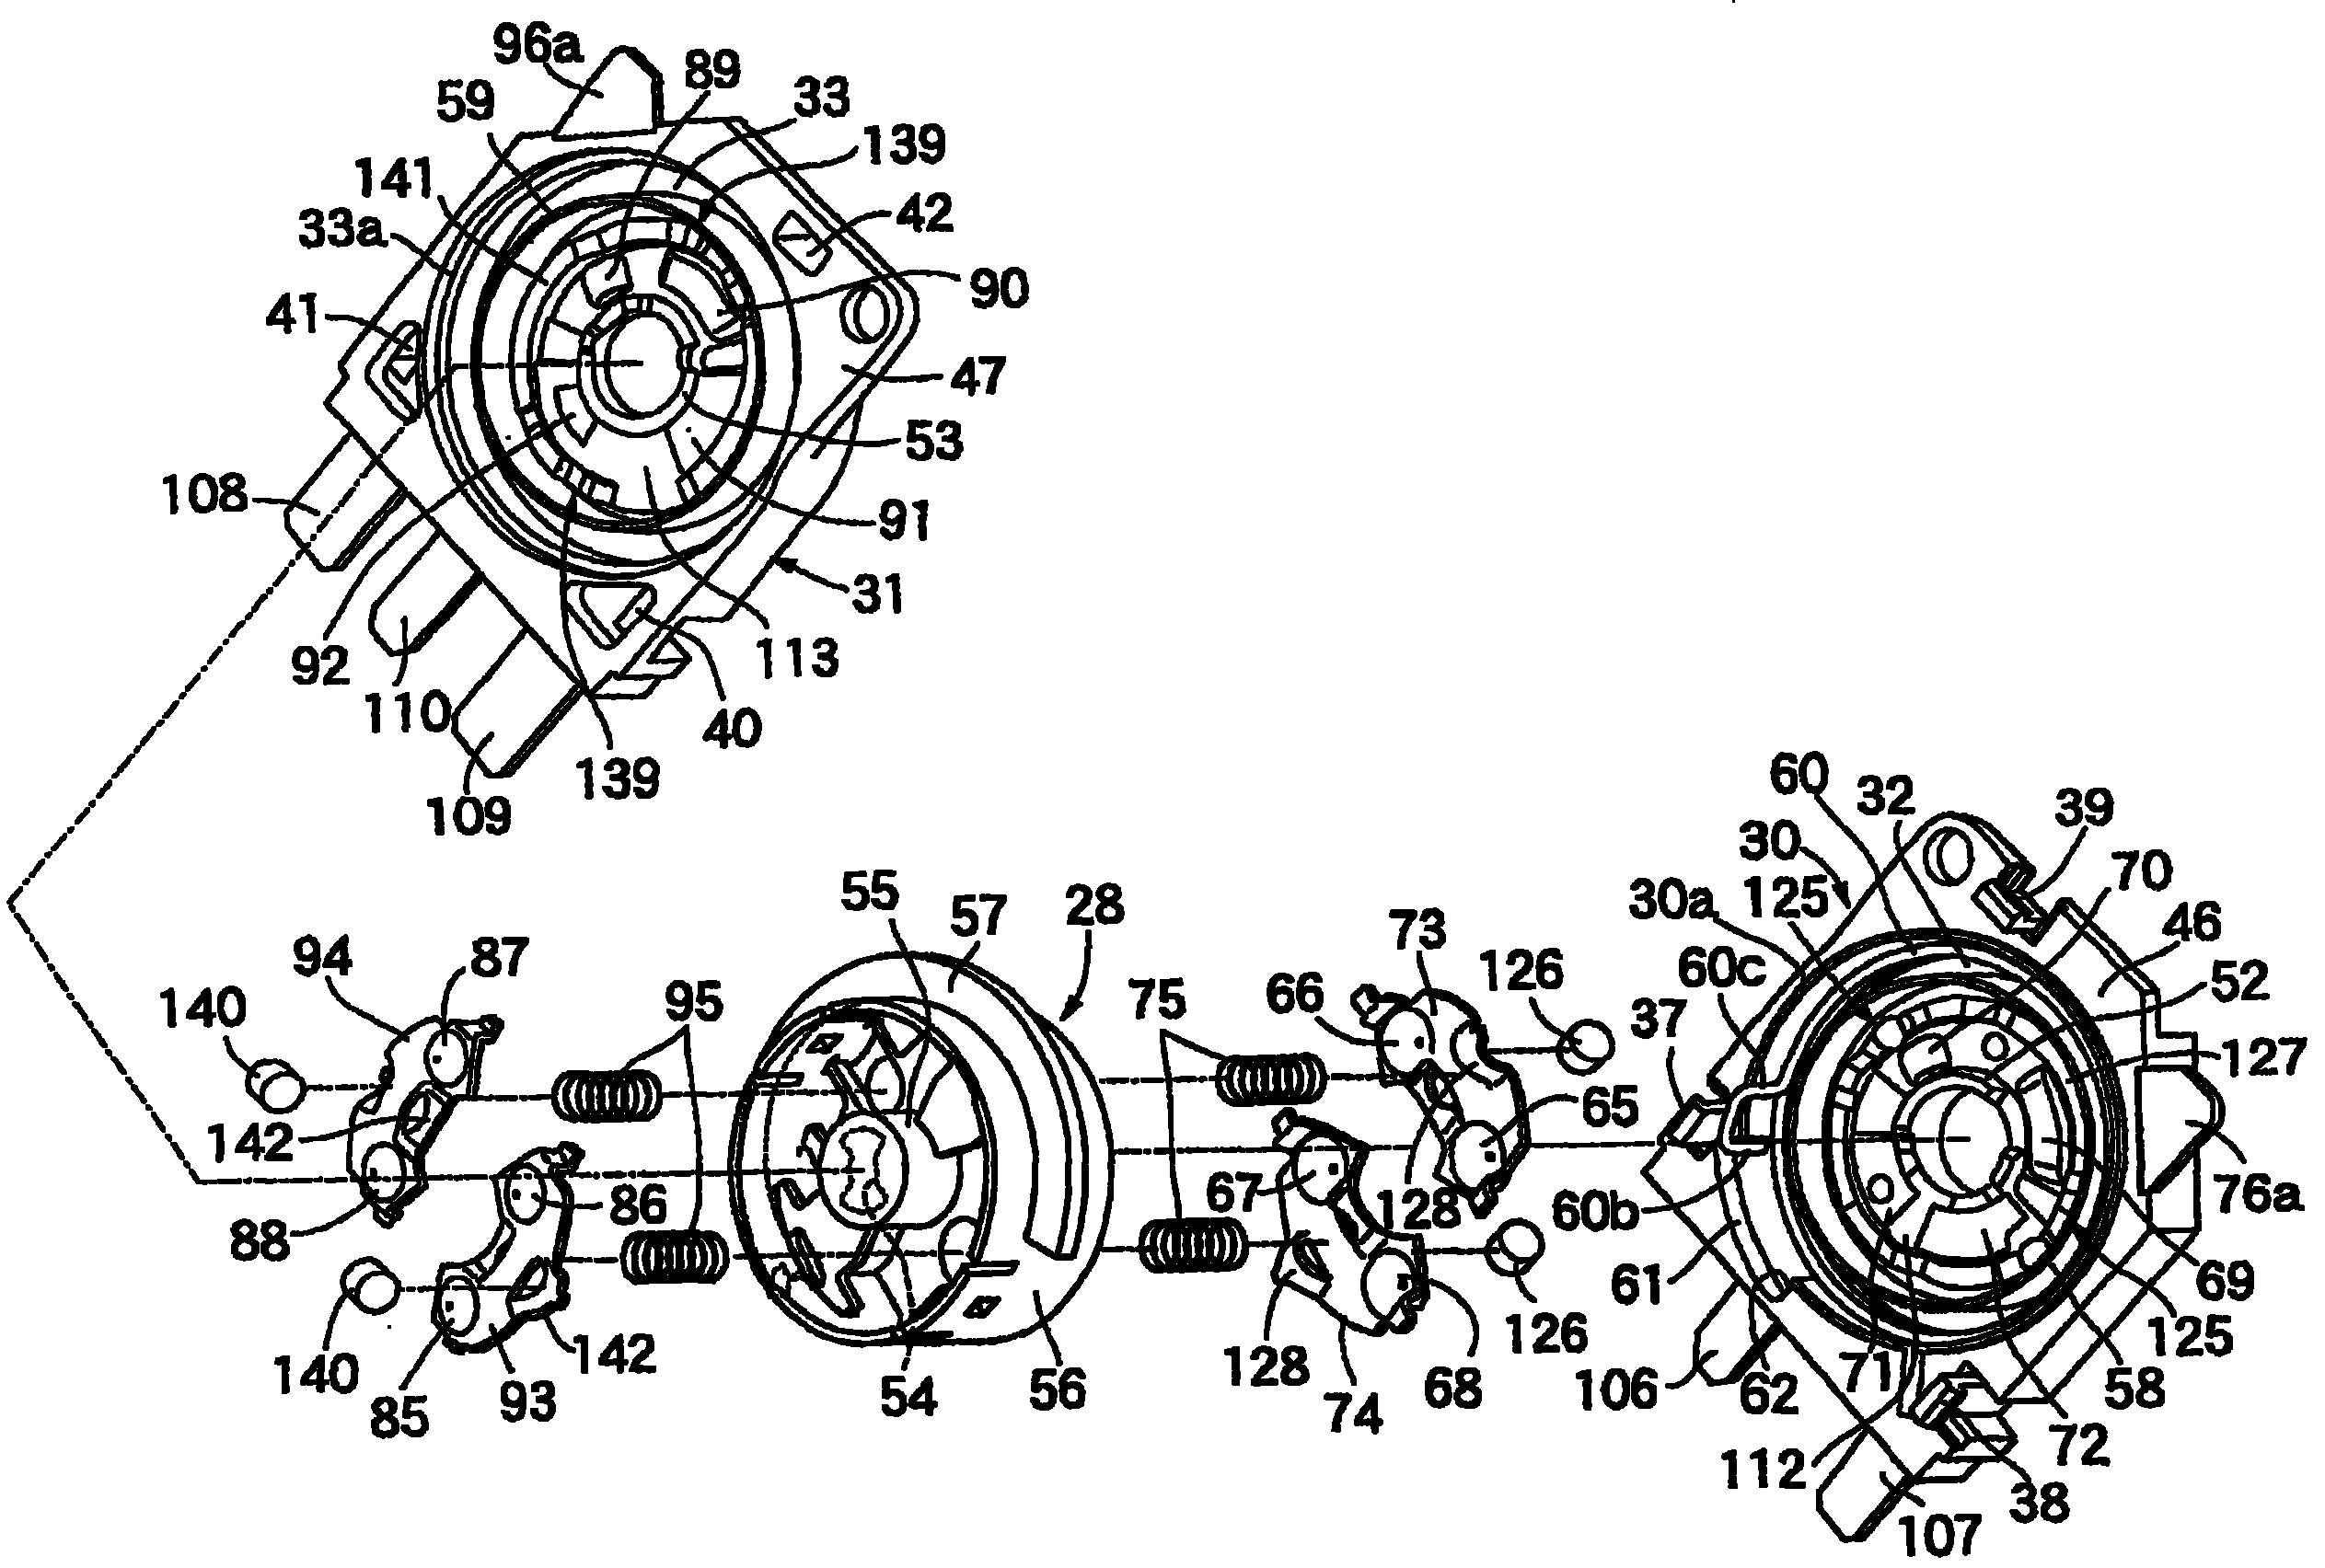 Rotary switch device